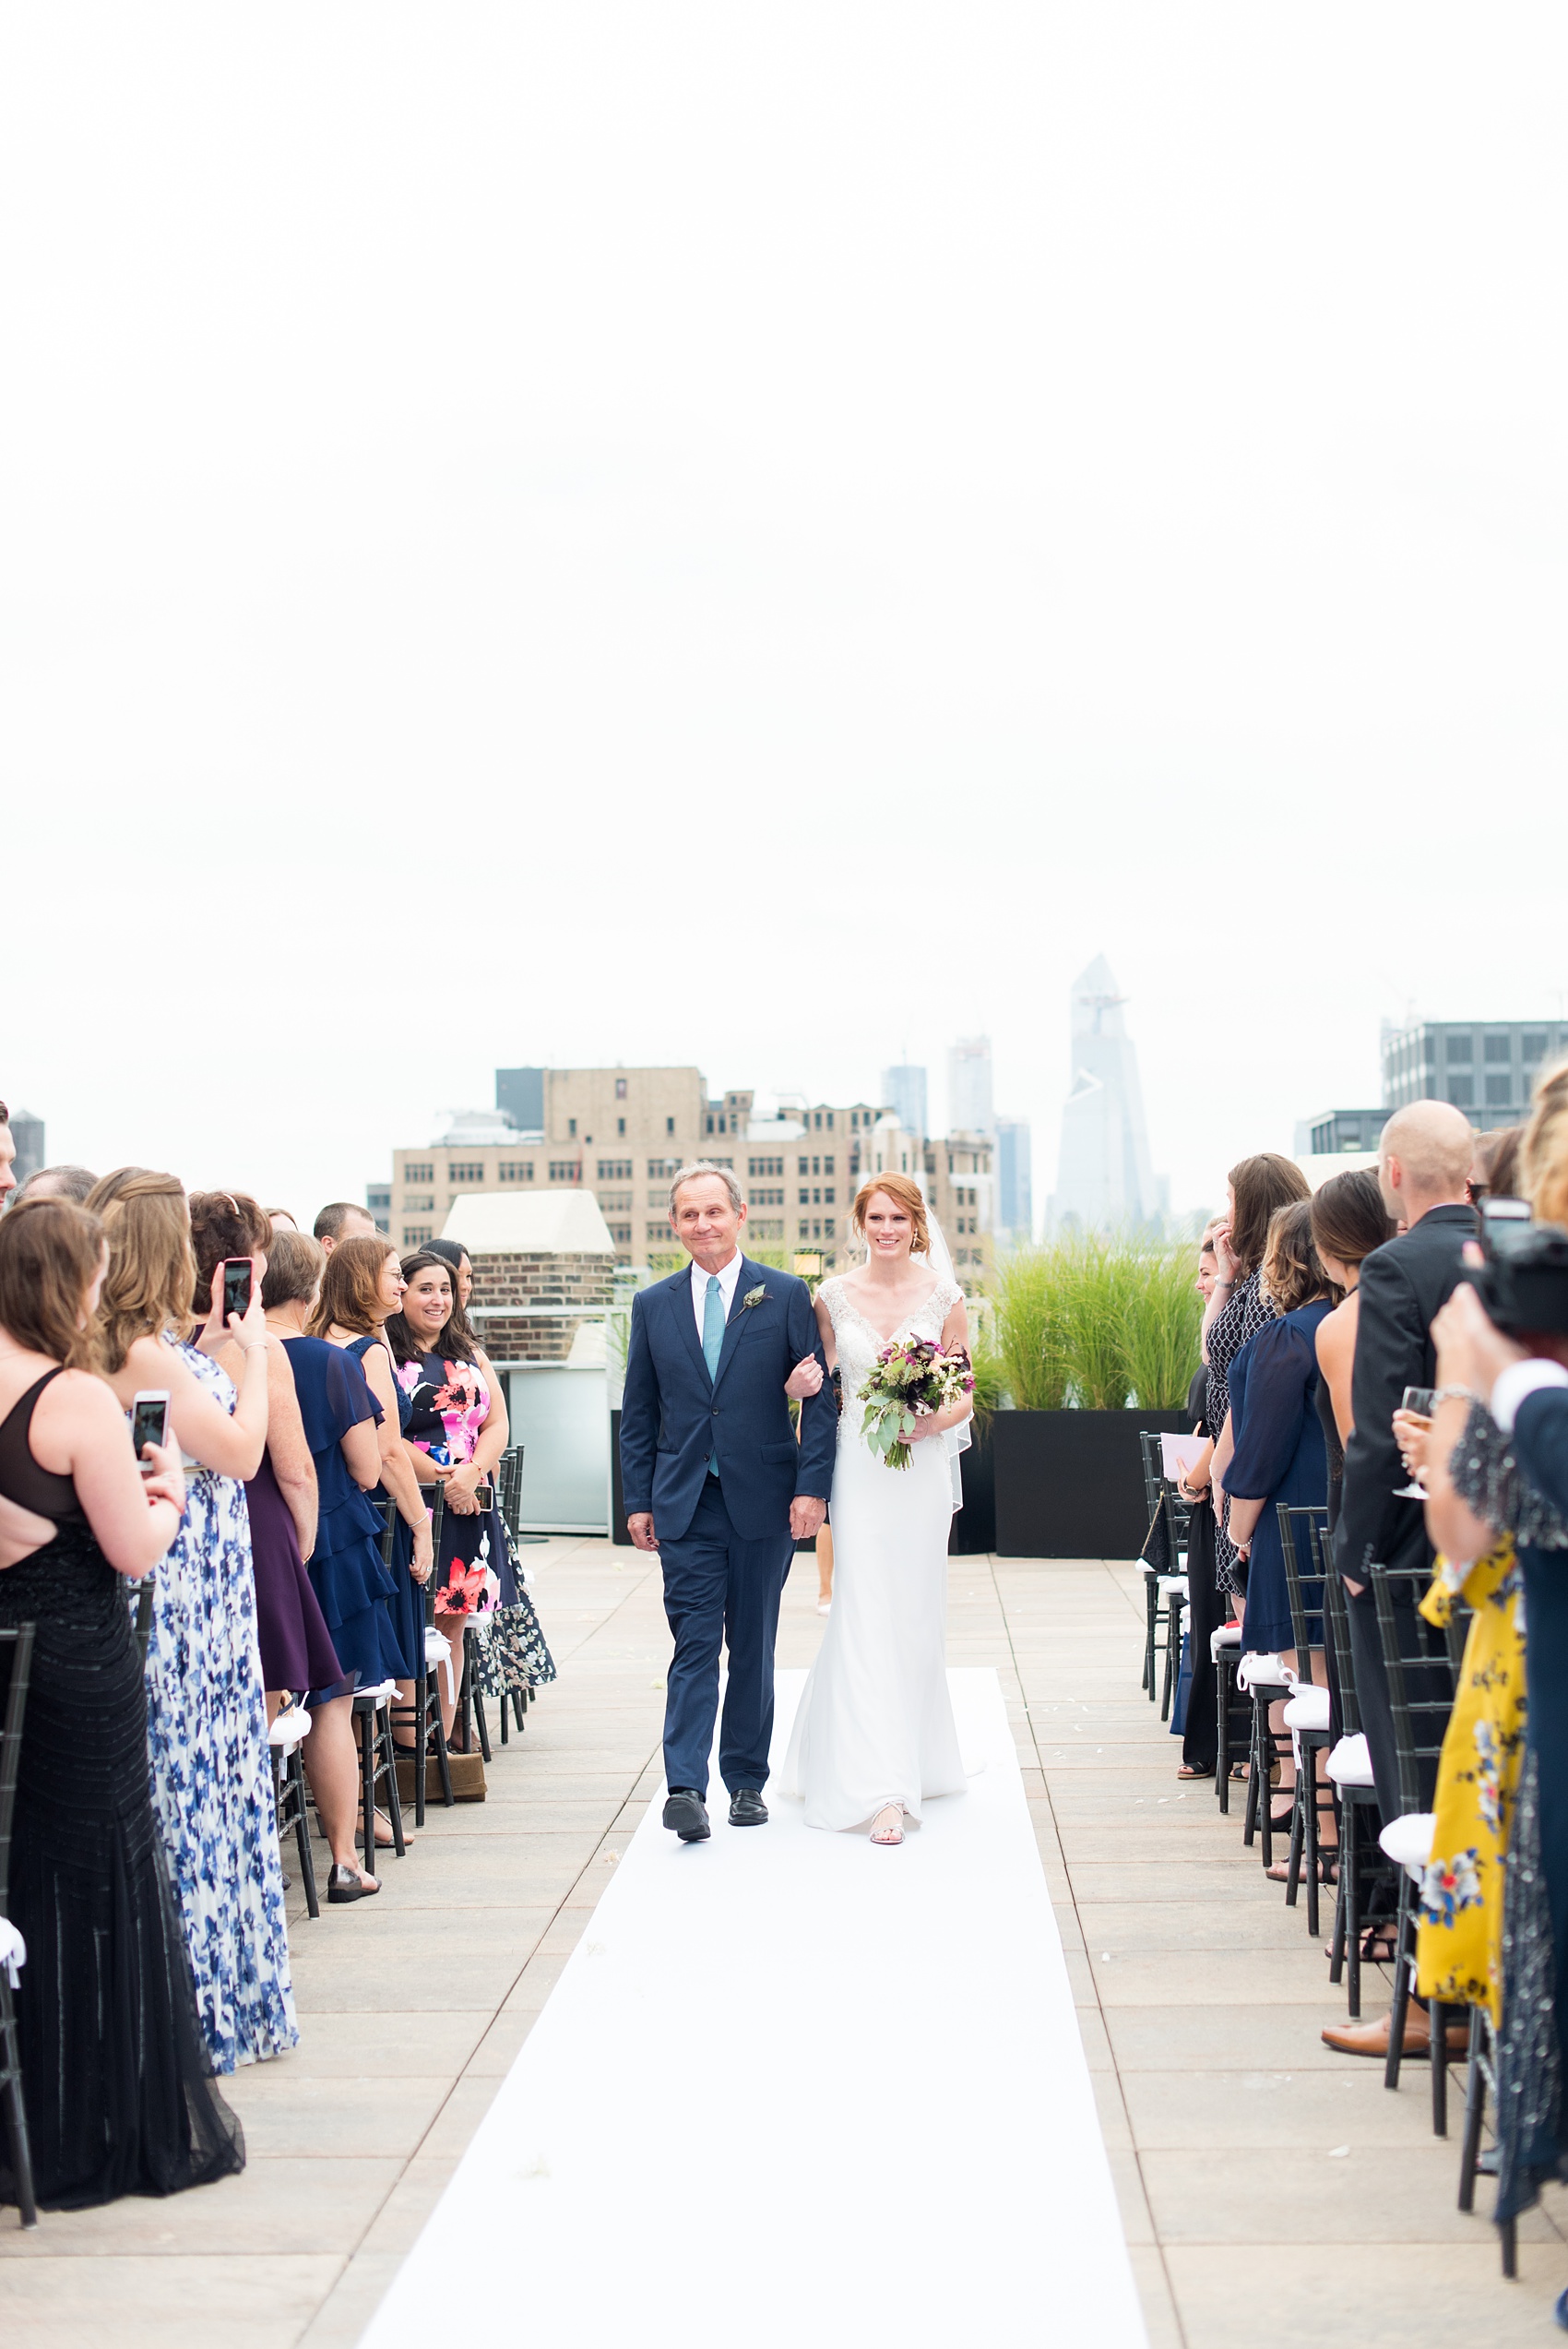 Photos of a NYC wedding venue, Tribeca Rooftop, by Mikkel Paige Photography. This ceremony and reception location has an outdoor space overlooking the Manhattan skyline. These pictures will provide inspiration in New York! The couple dreamed of getting married in this awesome city with flowers and colors of fall. Click through for more details from this beautiful celebration! #TribecaRooftop #NYCVenues #MikkelPaige #NYCwedding #NYCskyline #NYCWeddingPhotos #NYCWeddingPhotography